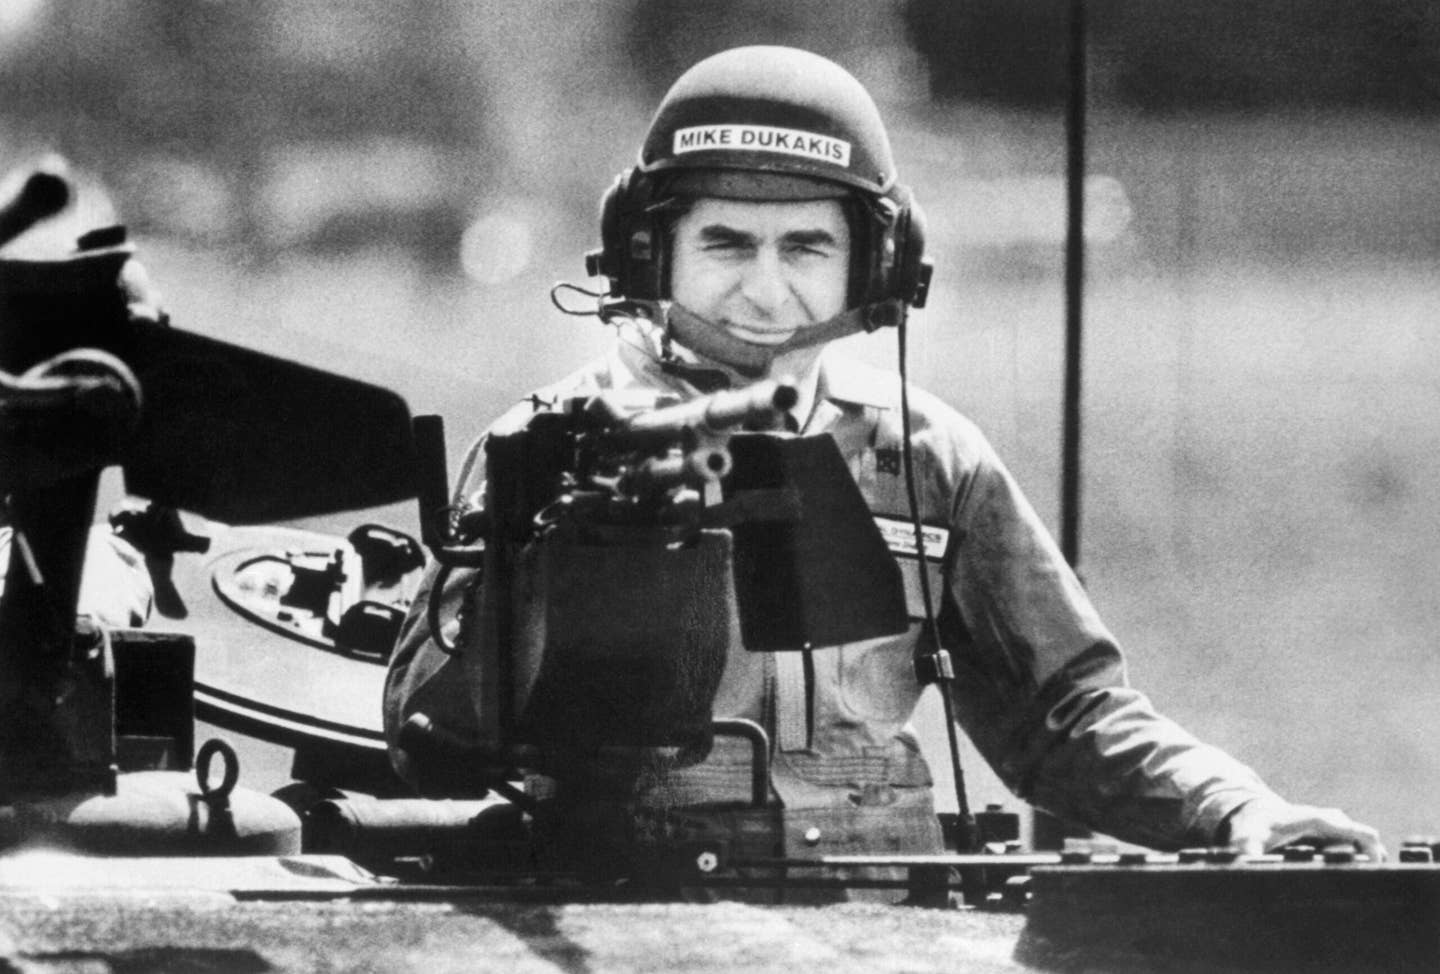 Then-presidential candidate, Mike Dukakis, wearing an army tanker's helmet, peers behind the loader's weapon of an MIAI Abrams Main Battle Tank during a demonstration ride in 1988. He <a href="https://www.270towin.com/1988_Election/">lost in a landslide</a> to George H. W. Bush, by a 426-111 Electoral College vote margin. (Getty Images photo).